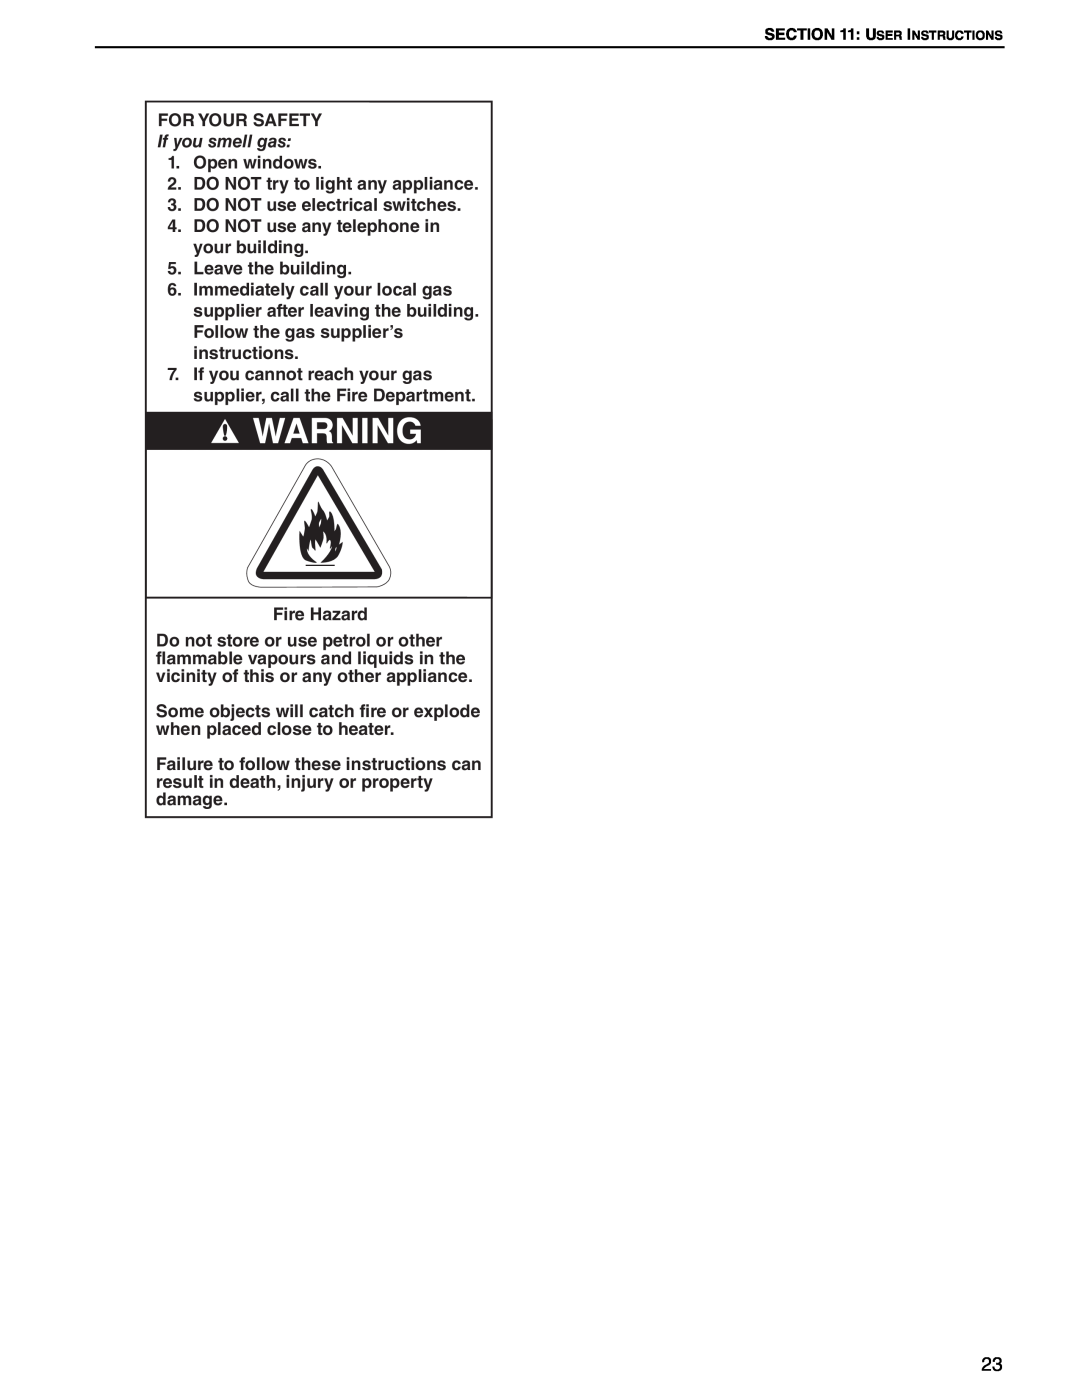 Roberts Gorden 350, 200, 150, 400, 300, 175, 225 250 service manual For Your Safety, If you smell gas 